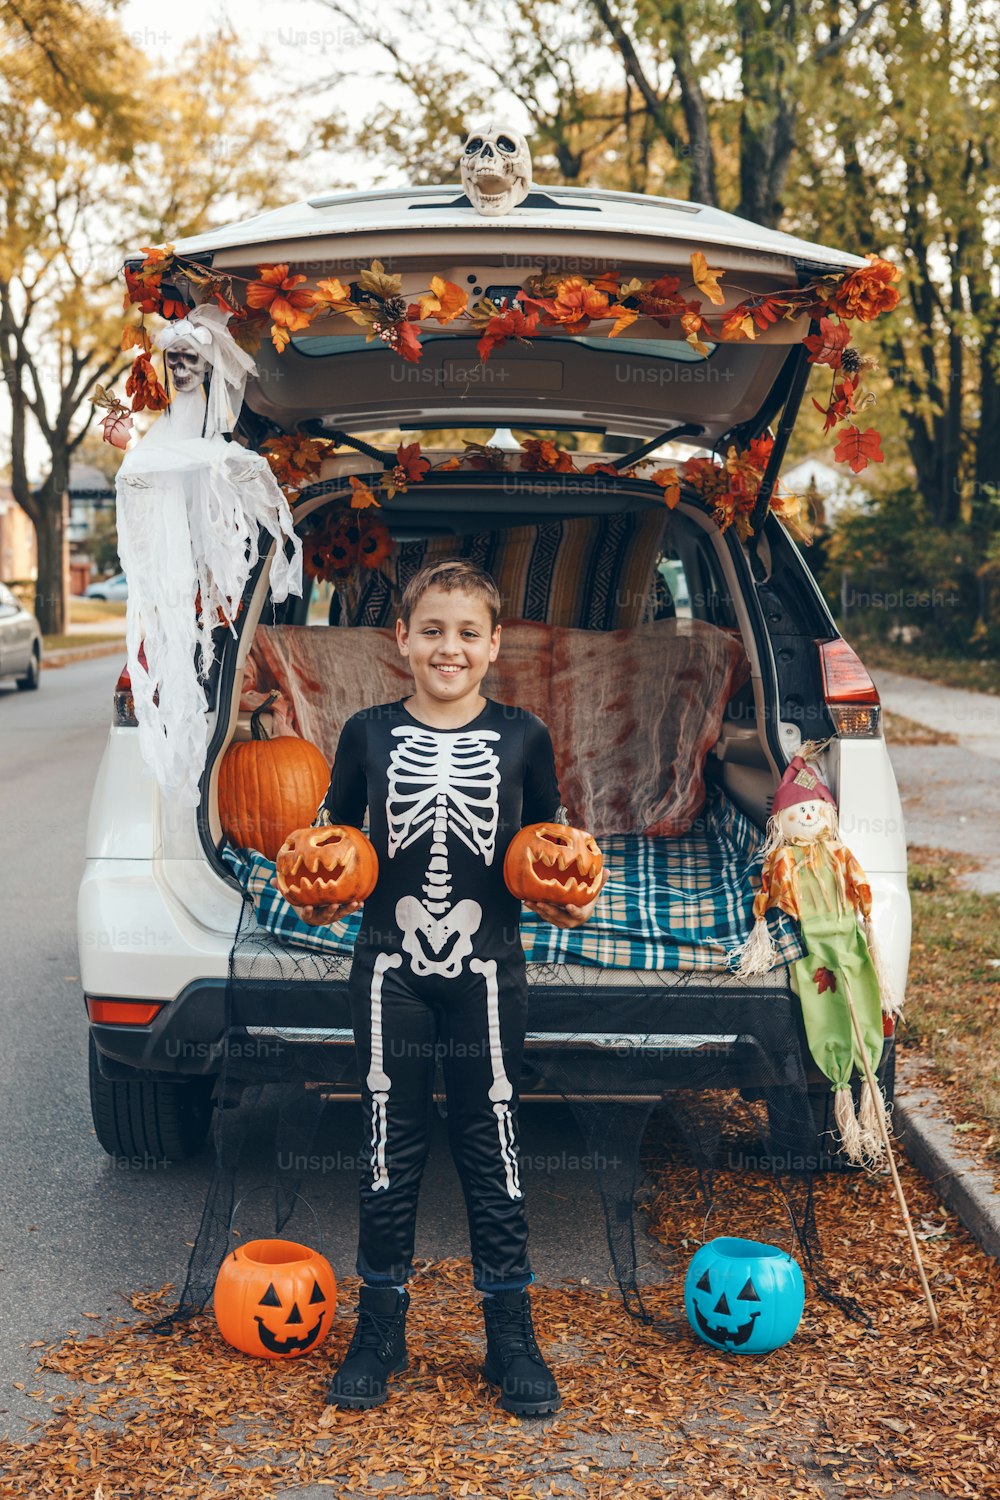 Trick or trunk. Boy child with red carved pumpkins celebrating Halloween in trunk of car. Happy kid preparing for October holiday outdoor. Social distance and safe alternative celebration.